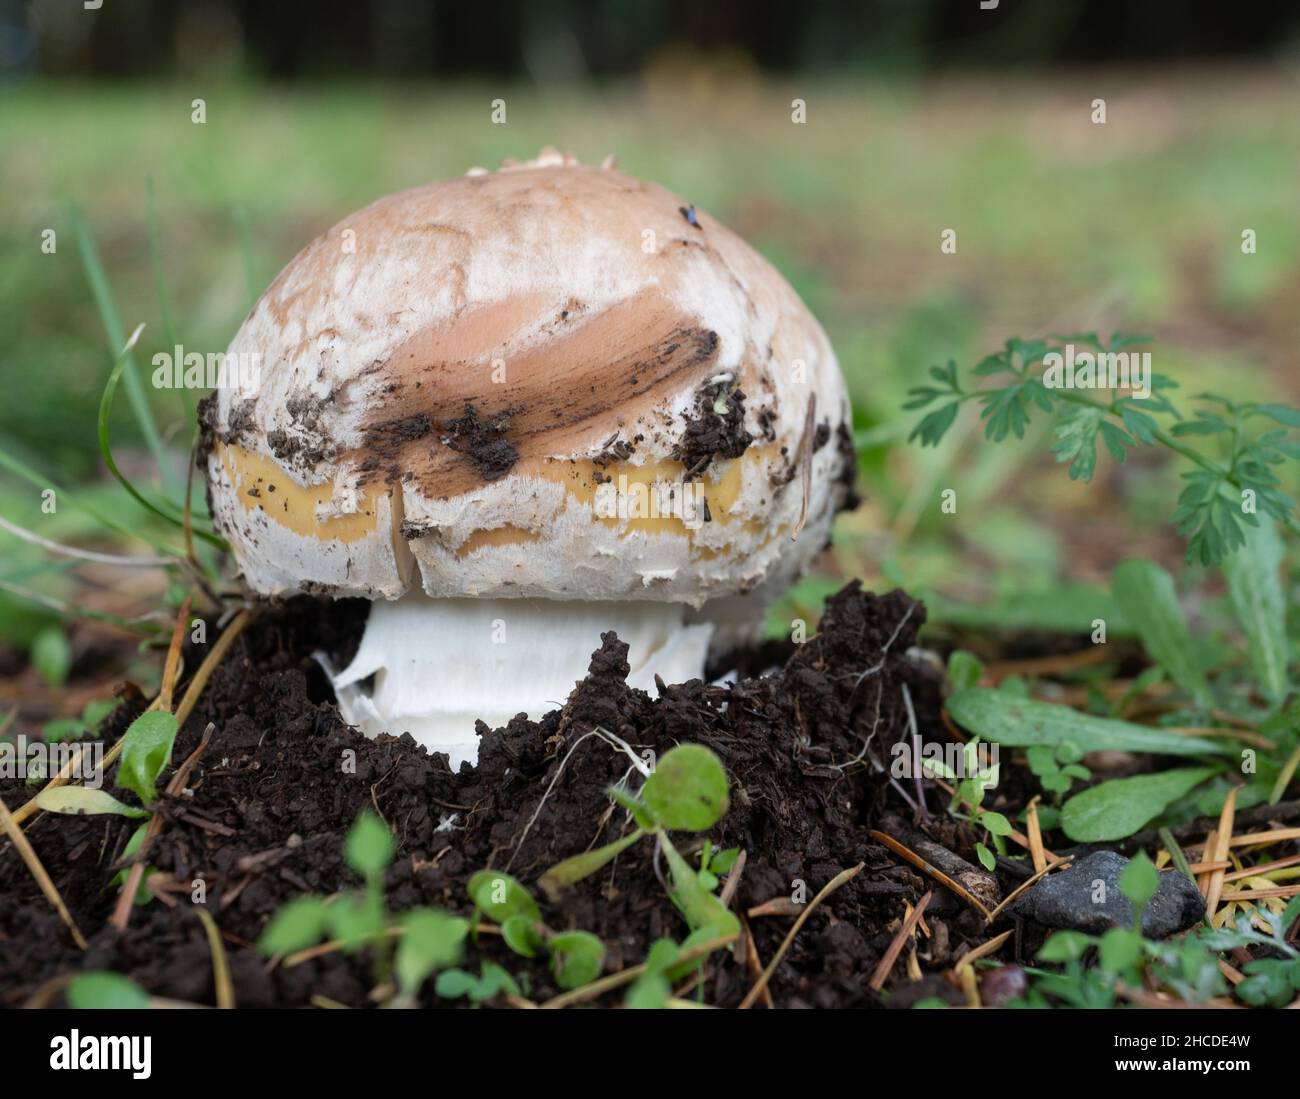 Close up of a Western Pine Mushroom emerging from dark brown soil with the mushroom's cap dirty and damaged. Photographed at eye level with a shallow Stock Photo